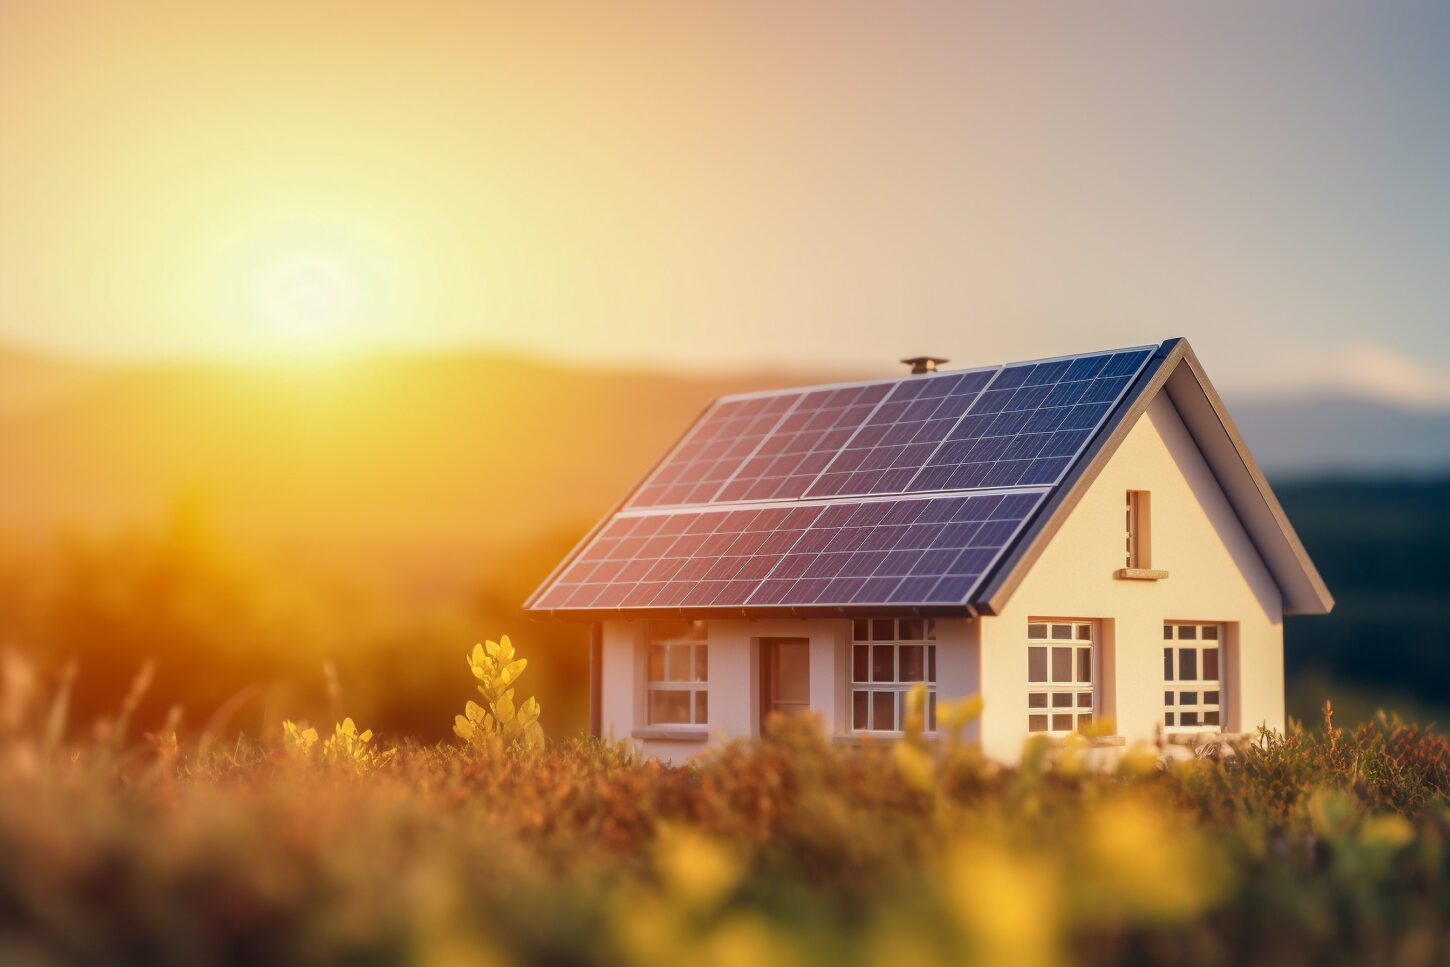 miniature-house-with-solar-panels-on-roof-at-sunset-concept-of-renewable-energy-and-alternative-energy-ideas-generative-ai-illustration